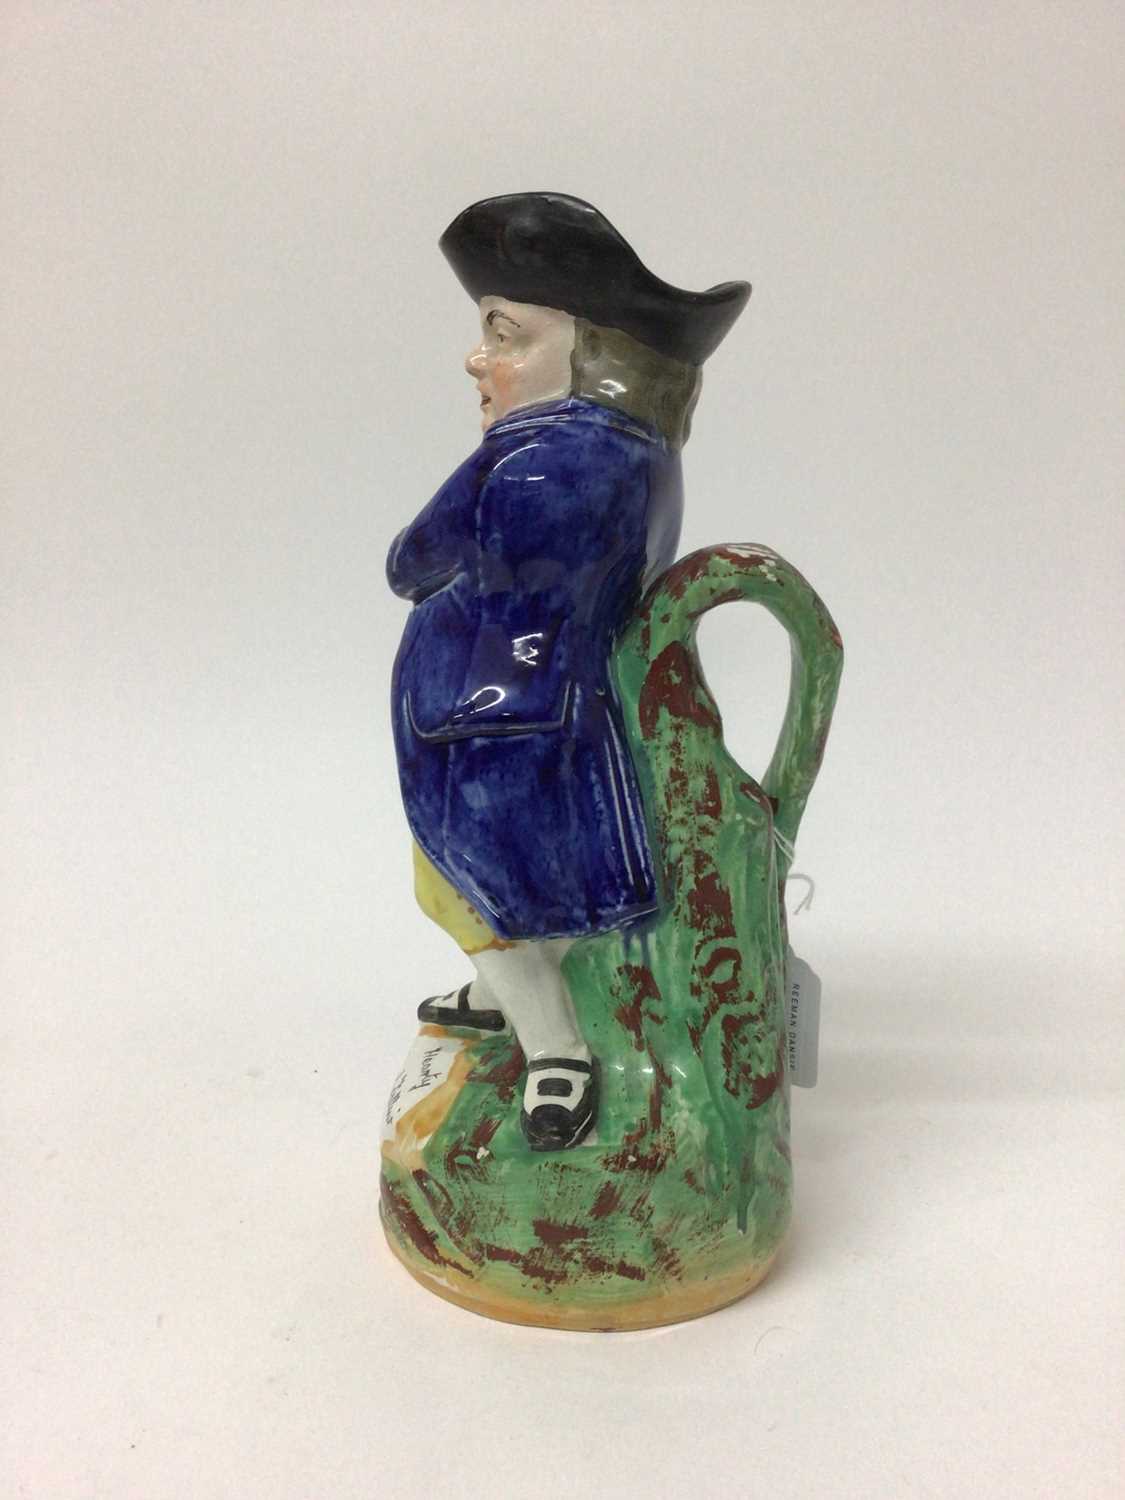 Staffordshire ‘Hearty Good Fellow’ jug - Image 2 of 3